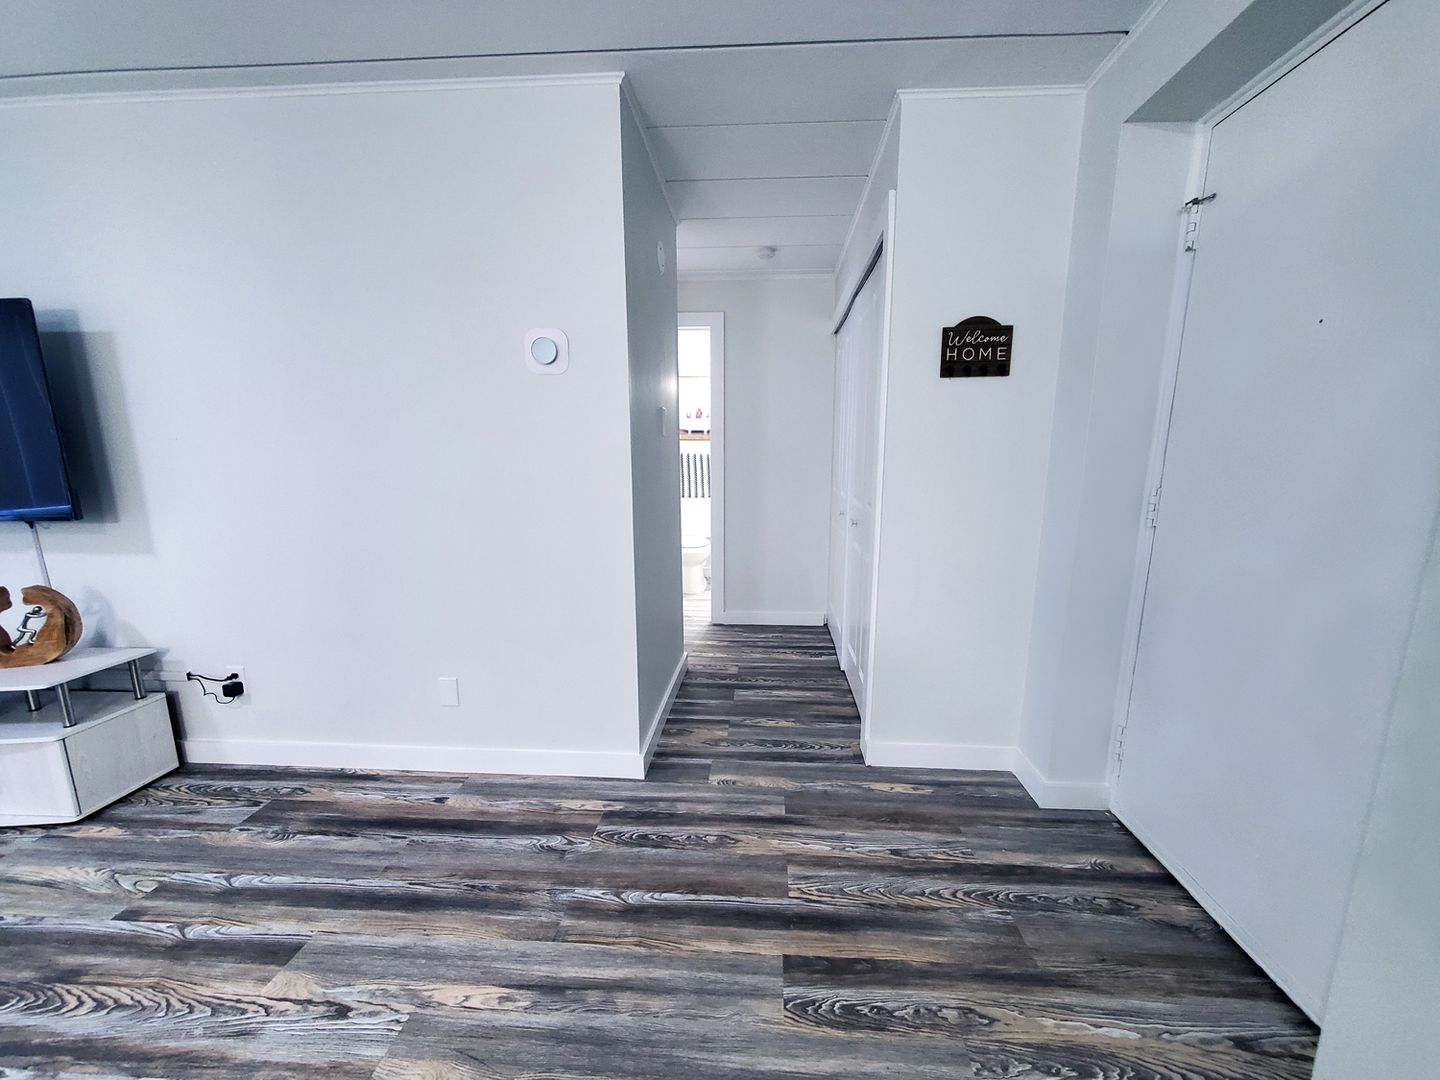 1 Bed and 1 Bath Apartments for Rent in Cleveland | Fully Renovated Image